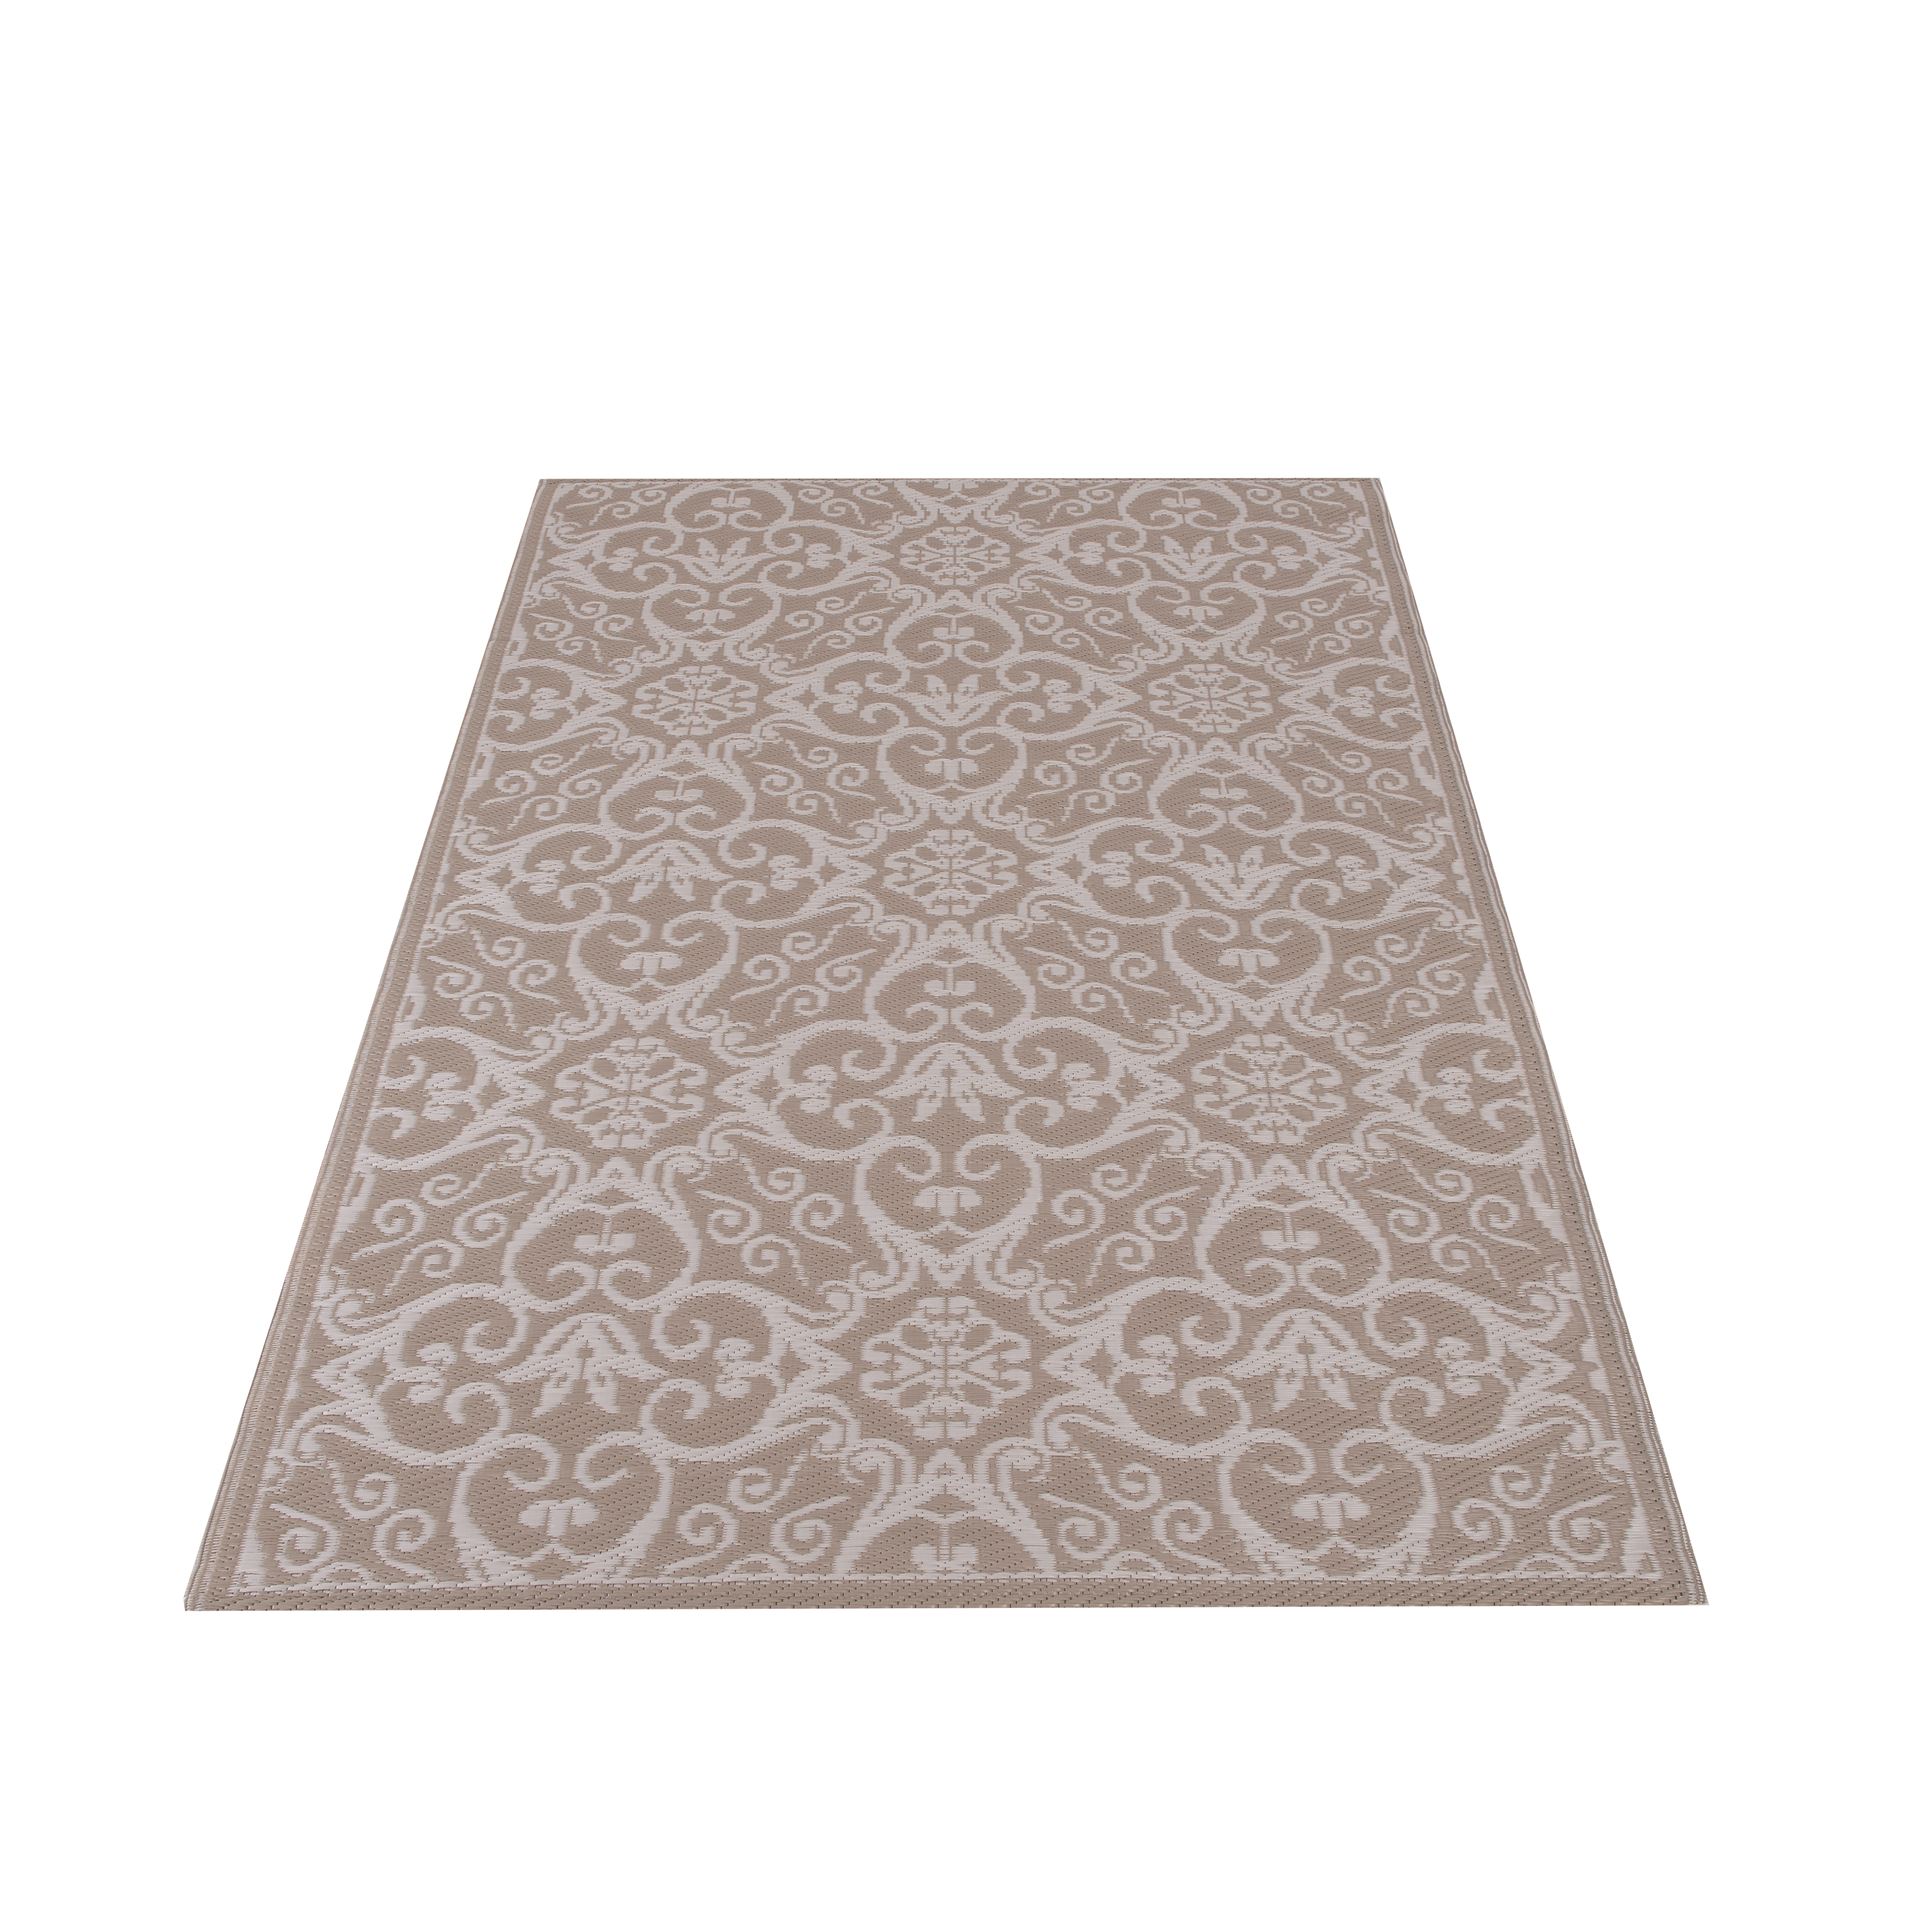 Buitentapijt-118x180cm-taupe-wit-gerecycled